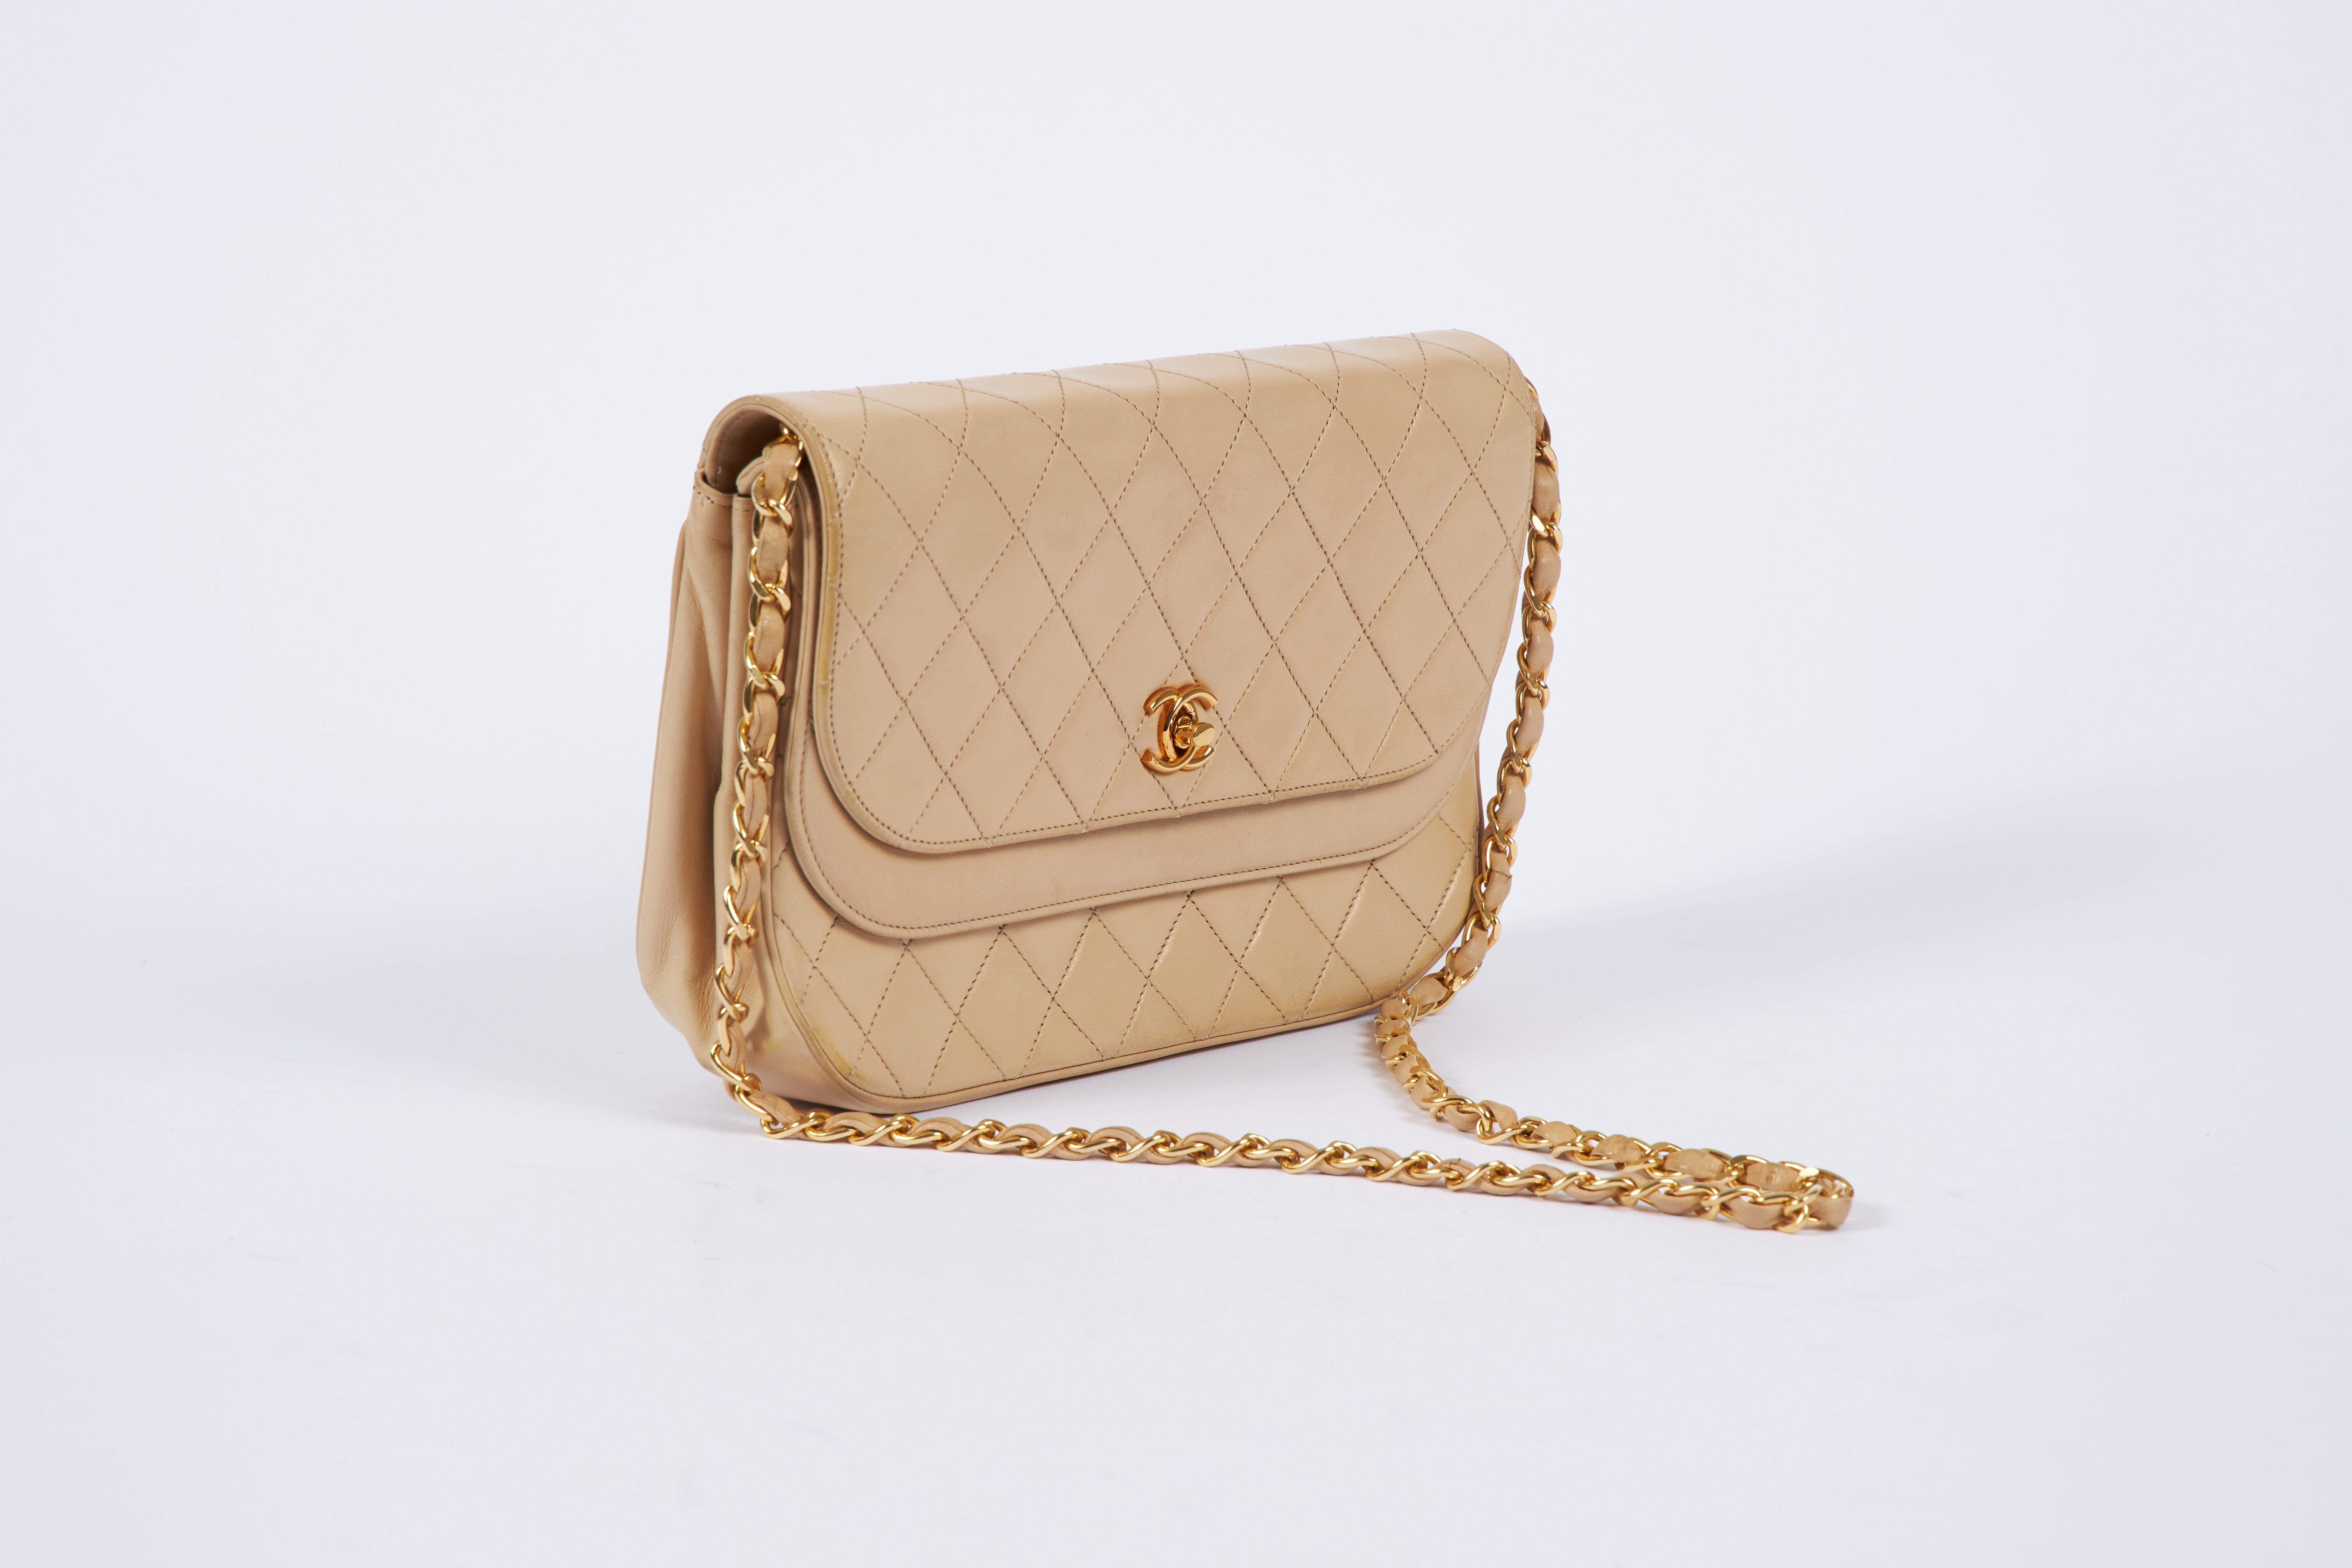 Chanel vintage 80s beige lambskin double flap with gold tone hardware. Comes with original dust cover.